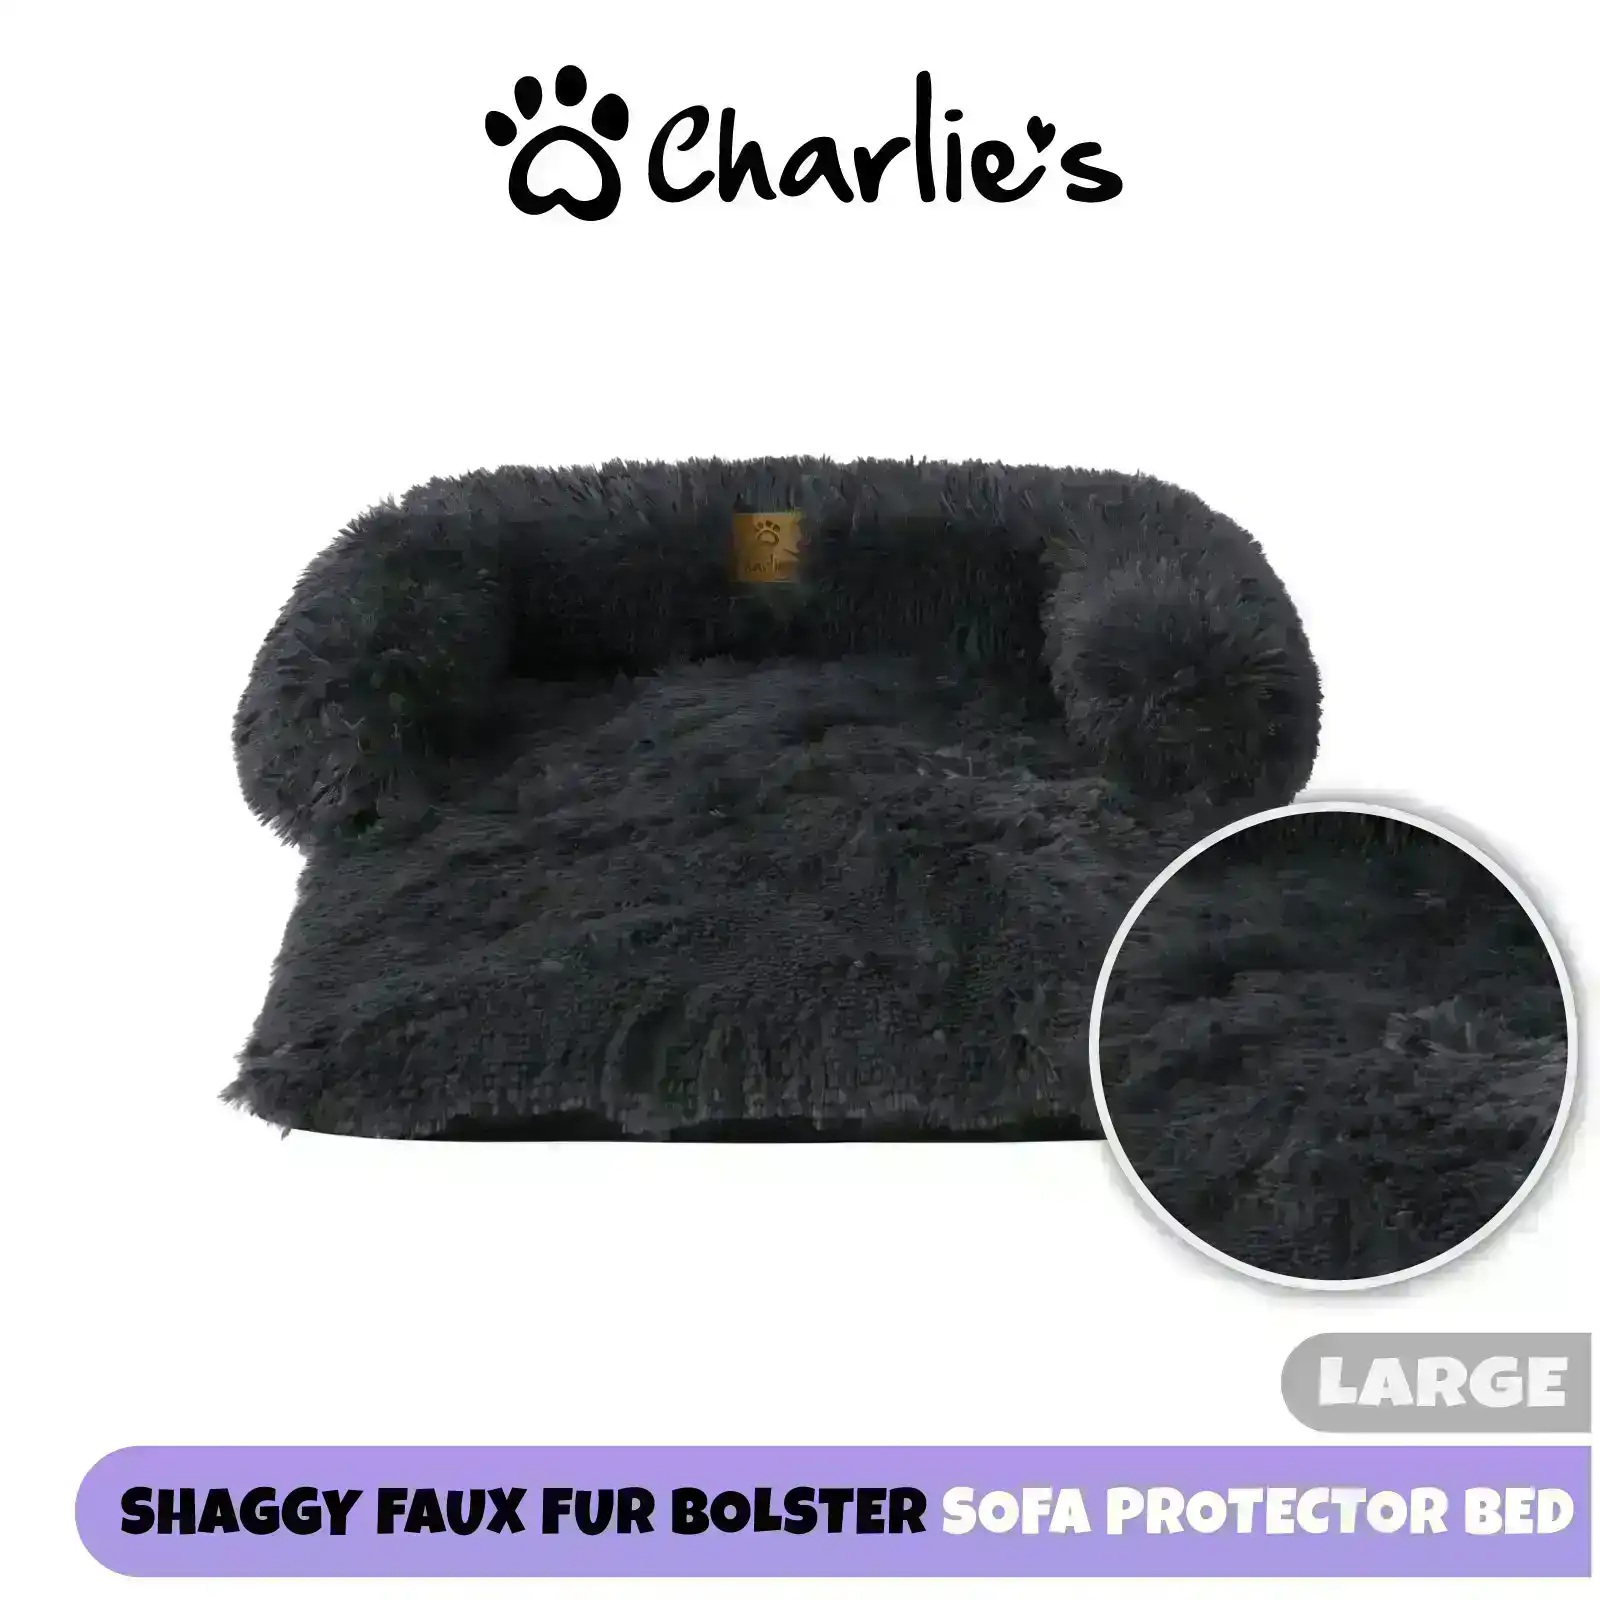 Charlie's Shaggy Faux Fur Bolster Sofa Protector Calming Dog Bed Charcoal Large